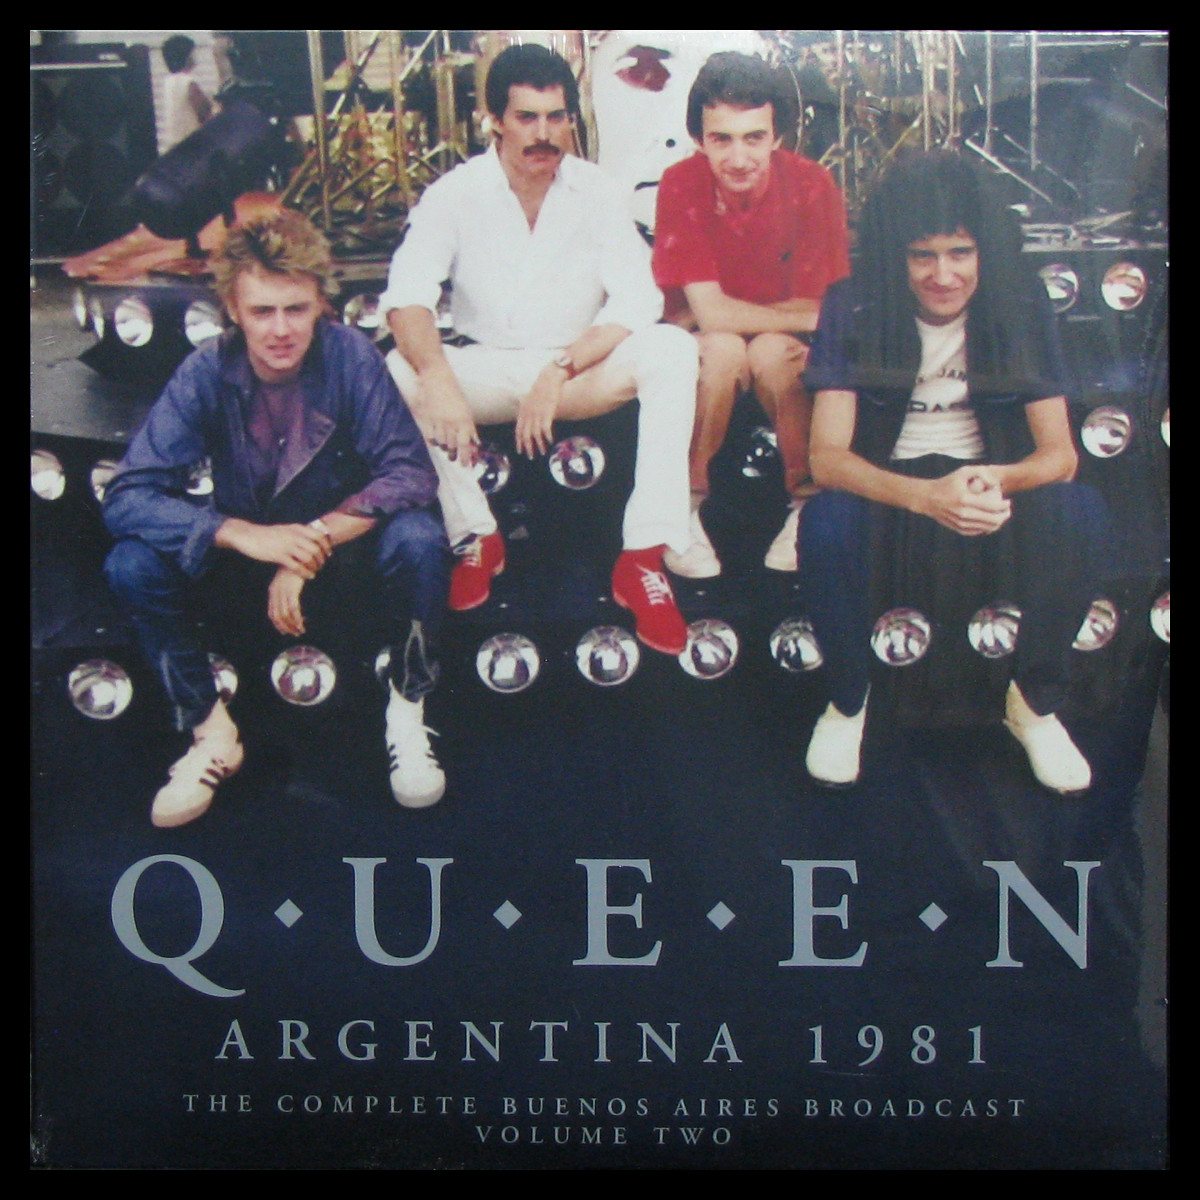 Argentina 1981 The Complete Buenos Aires Broadcast Volume Two